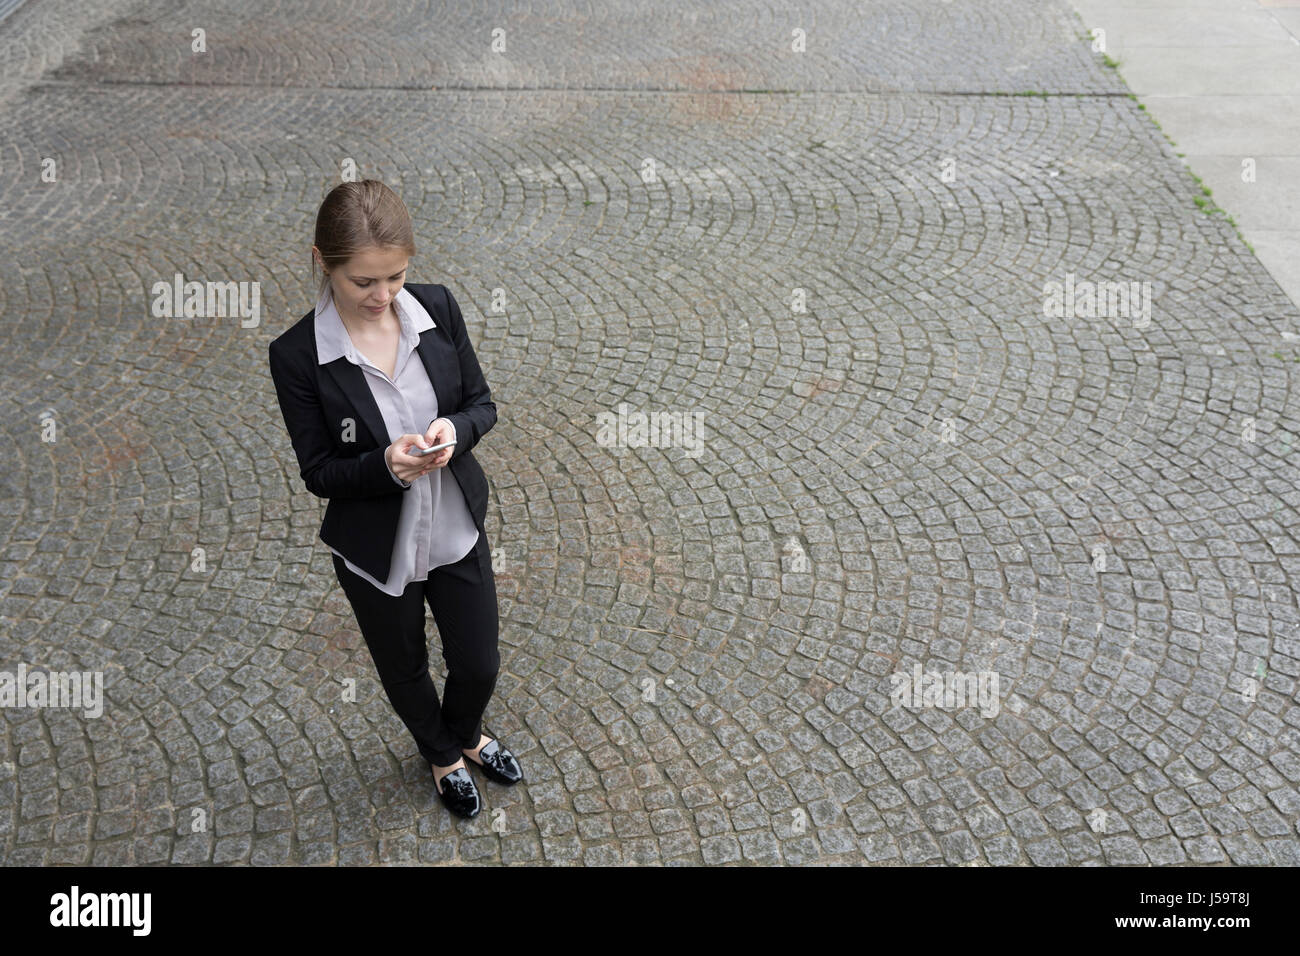 Elevated view of a Businesswoman using her smart phone. Business woman standing outside in modern city. Stock Photo